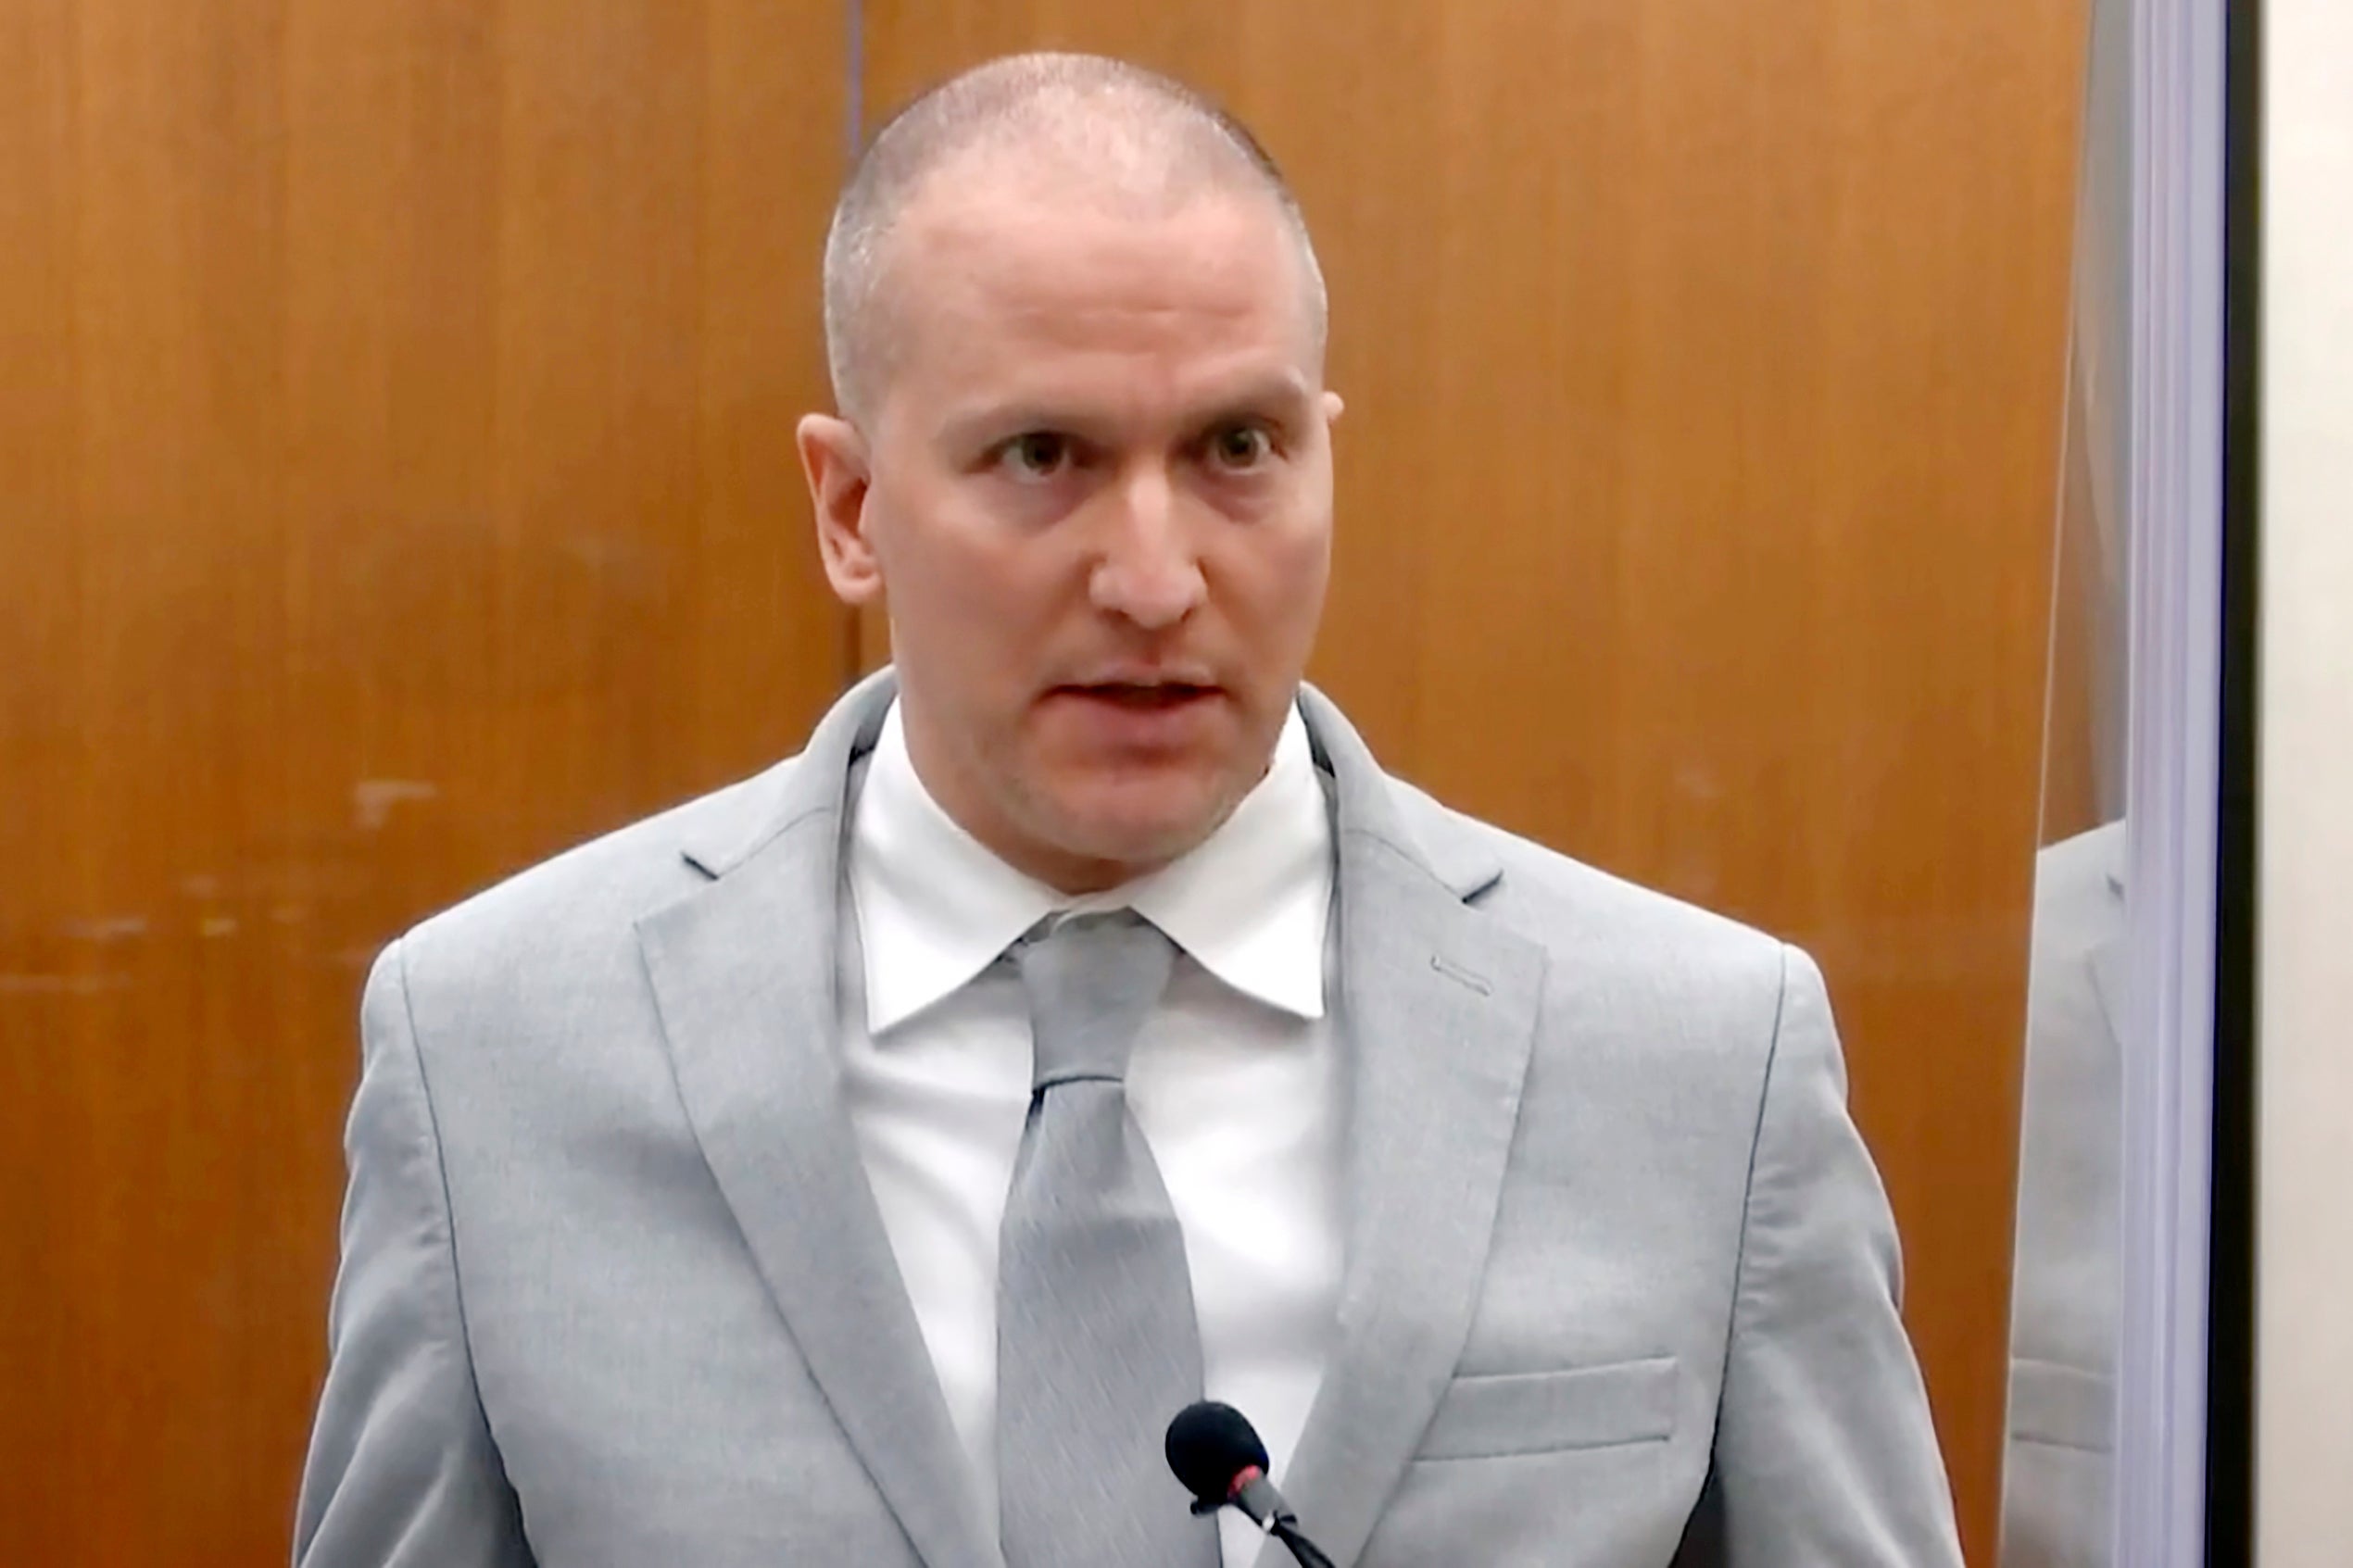 Derek Chauvin addresses the Hennepin County court at his sentencing hearing in June